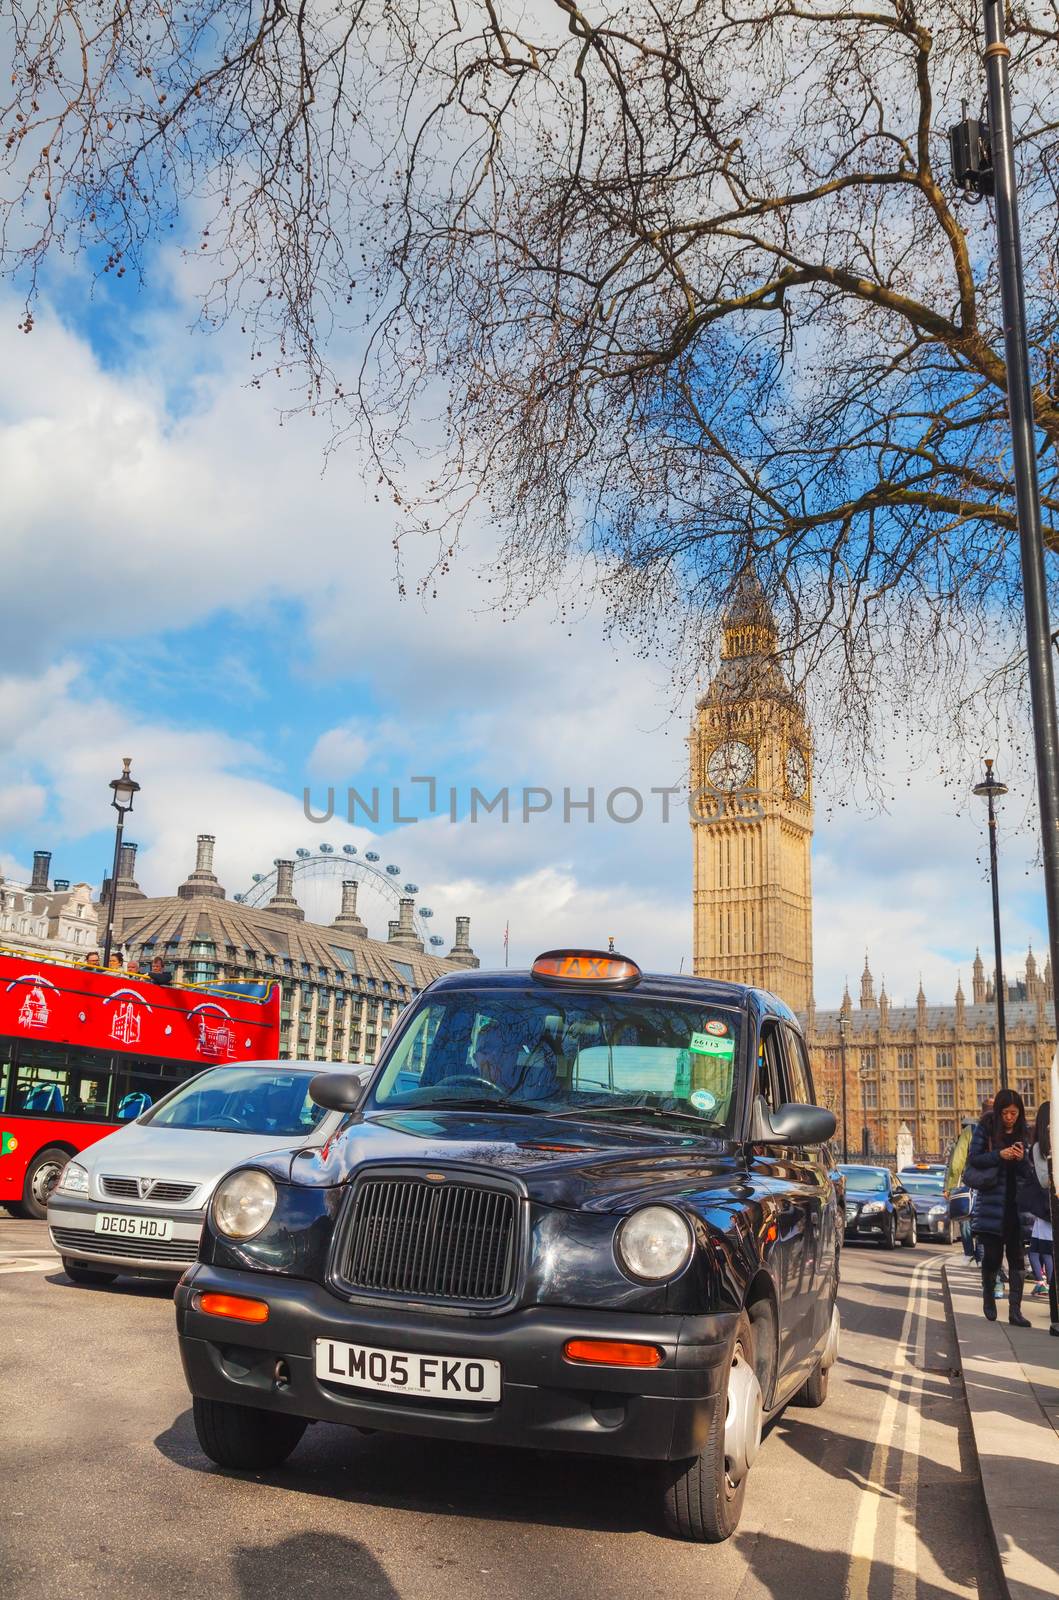 LONDON - APRIL 12: Famous taxi cab (hackney) at the Parliament square on April 12, 2015 in London, UK. A hackney or hackney carriage (a cab, black cab, hack or London taxi) is a carriage or automobile for hire.